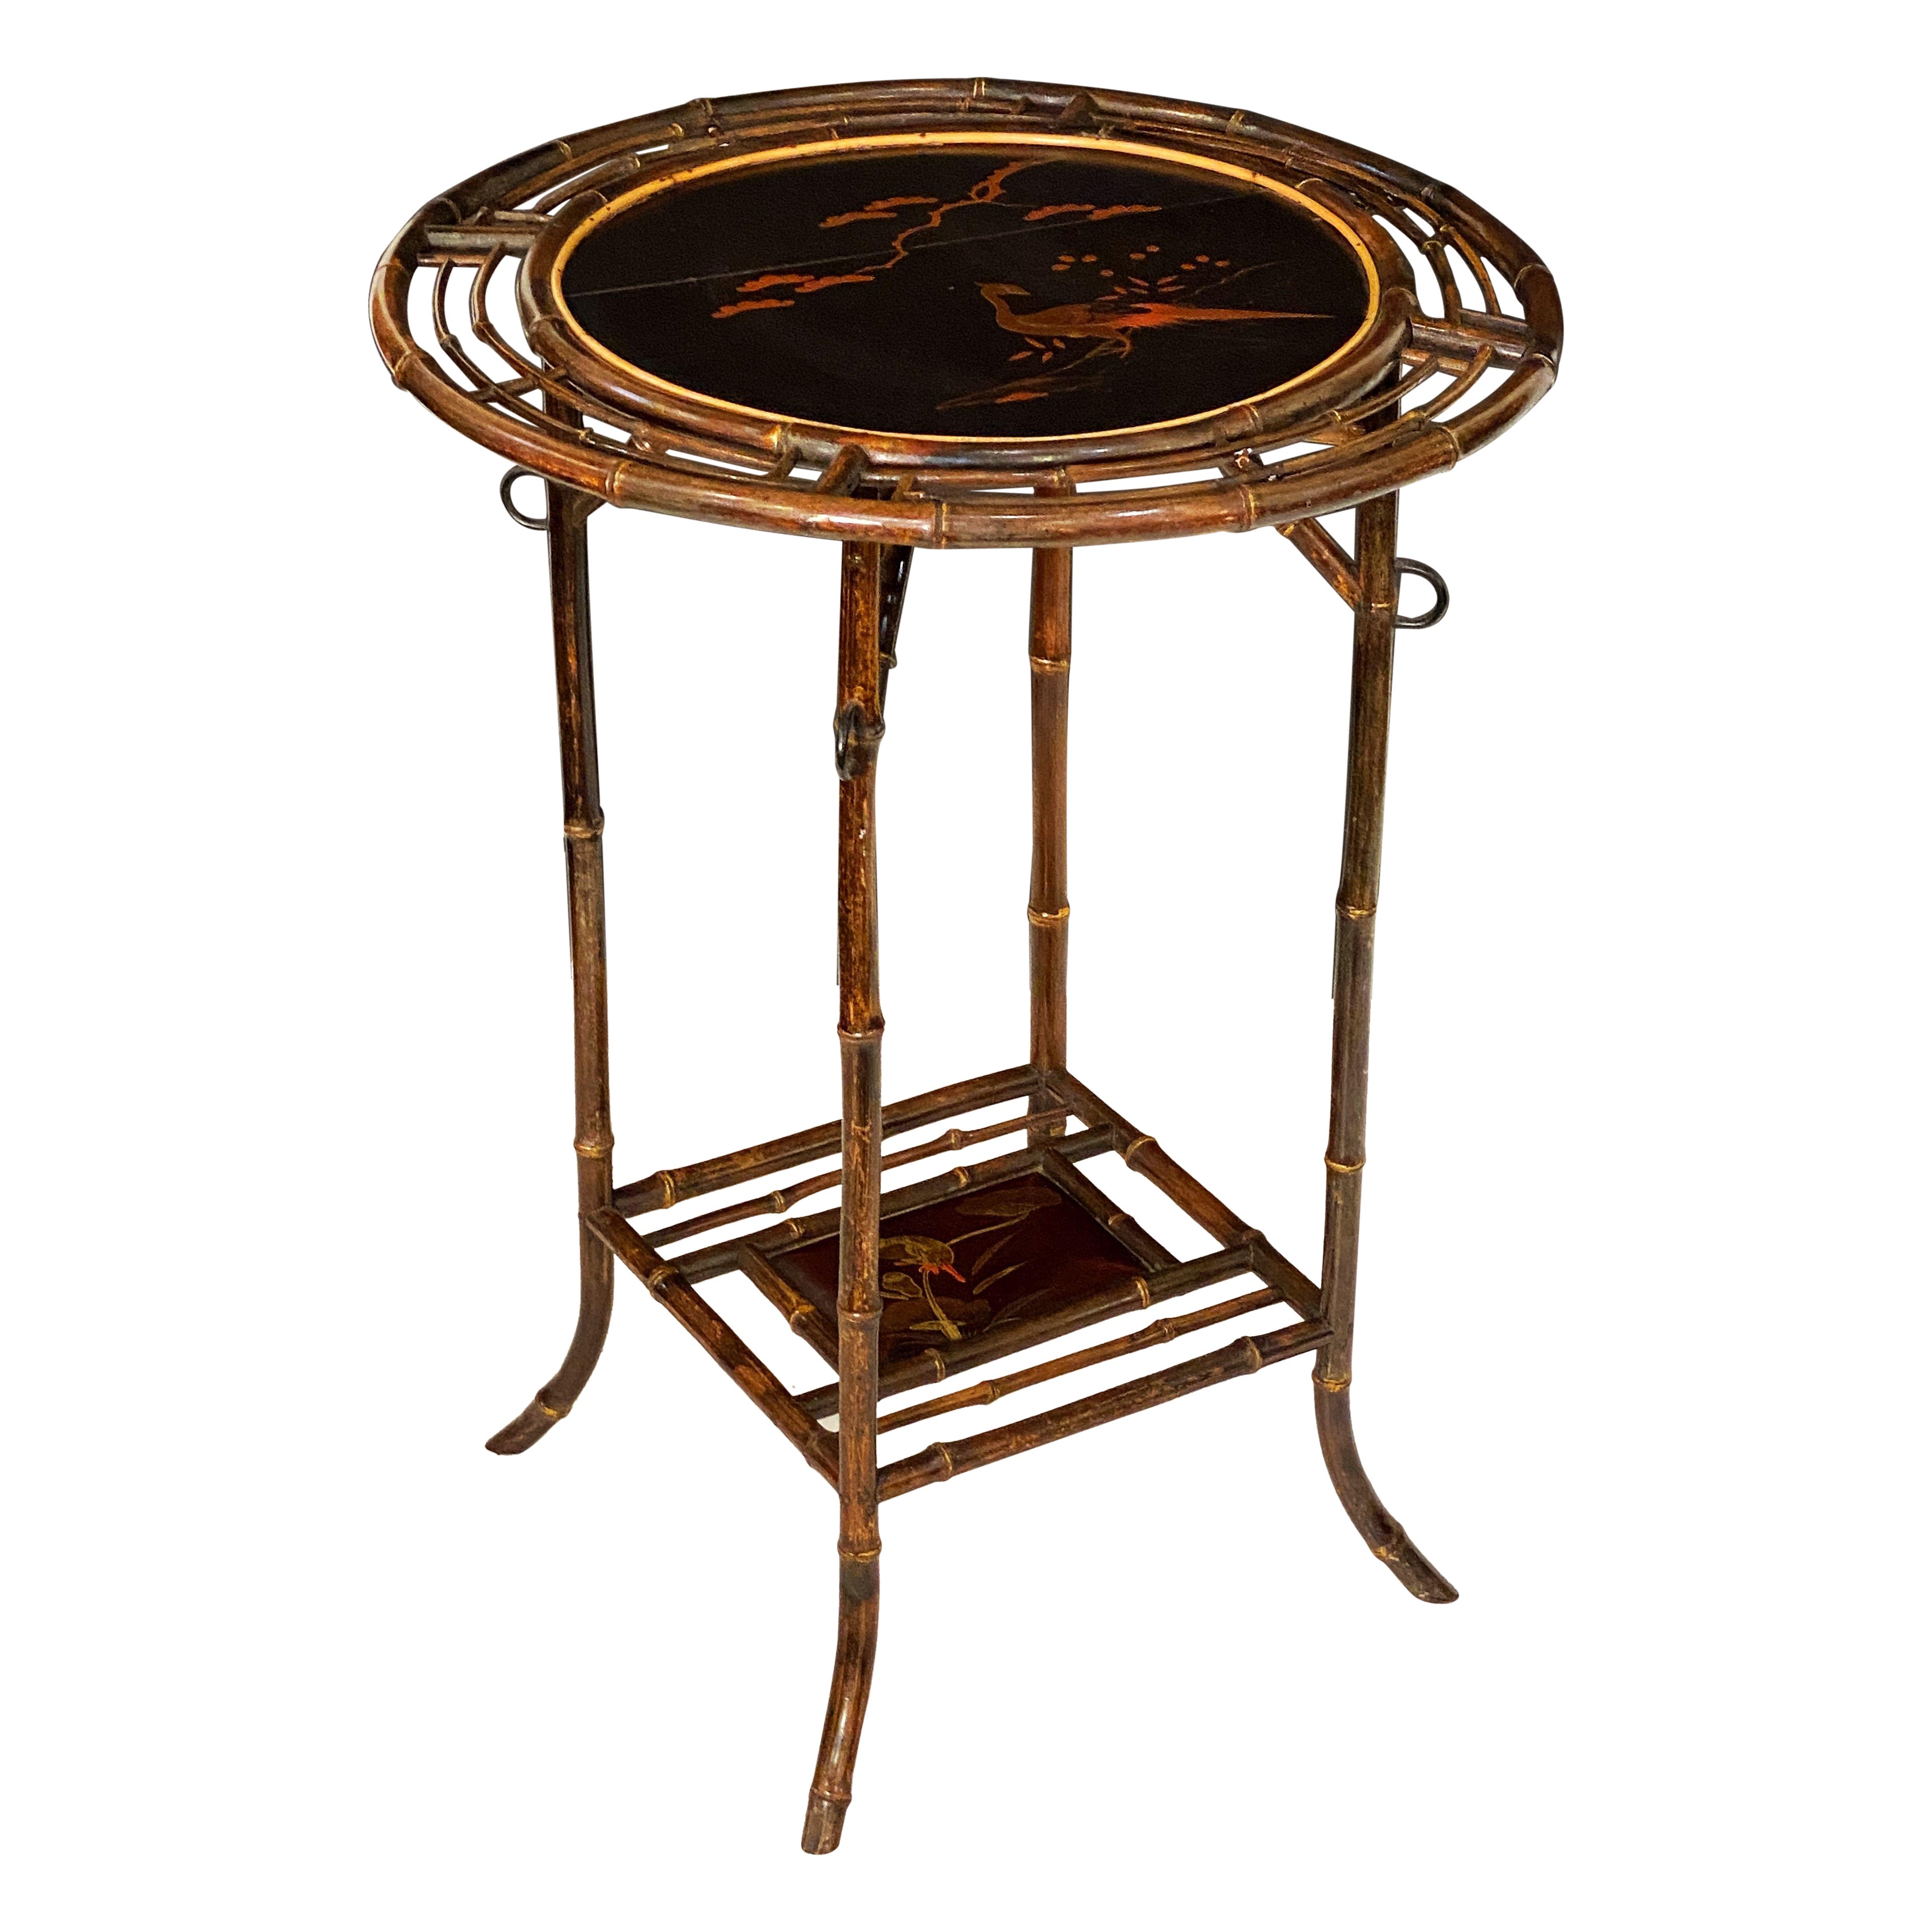 English Bamboo Round Occasional Table from the Aesthetic Movement